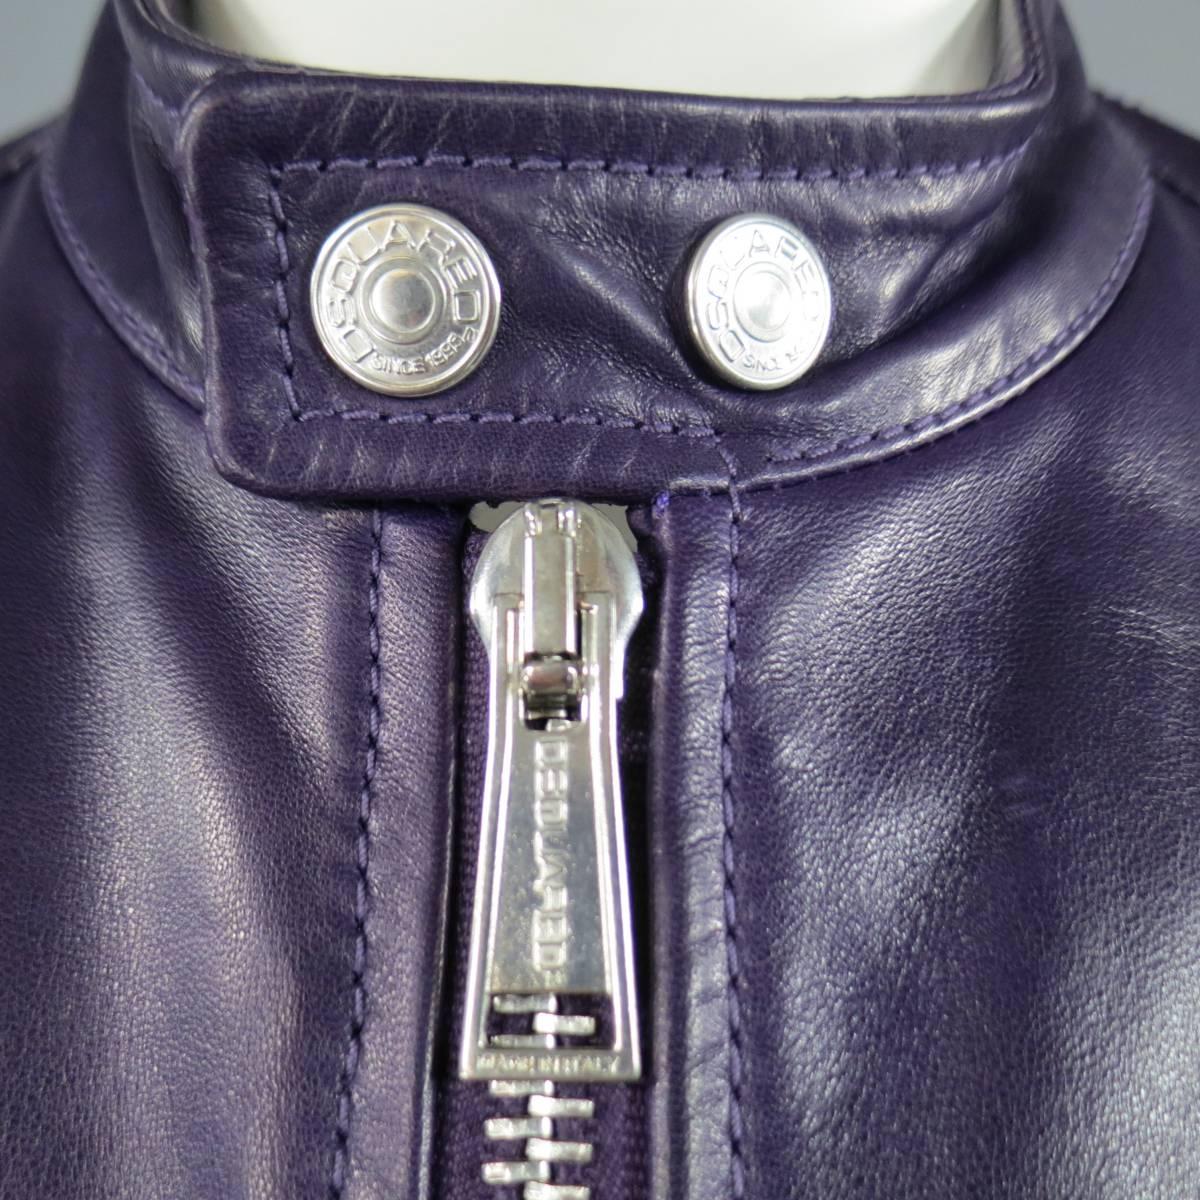 This ultra chic DSQUARED2 motorcycle jacket comes in a deep purple smooth leather and features a stand up band collar with silver tone snap closure, thick double zip closure, triple zip pockets, and snap cuffs with zip.
 
Excellent Pre-Owned